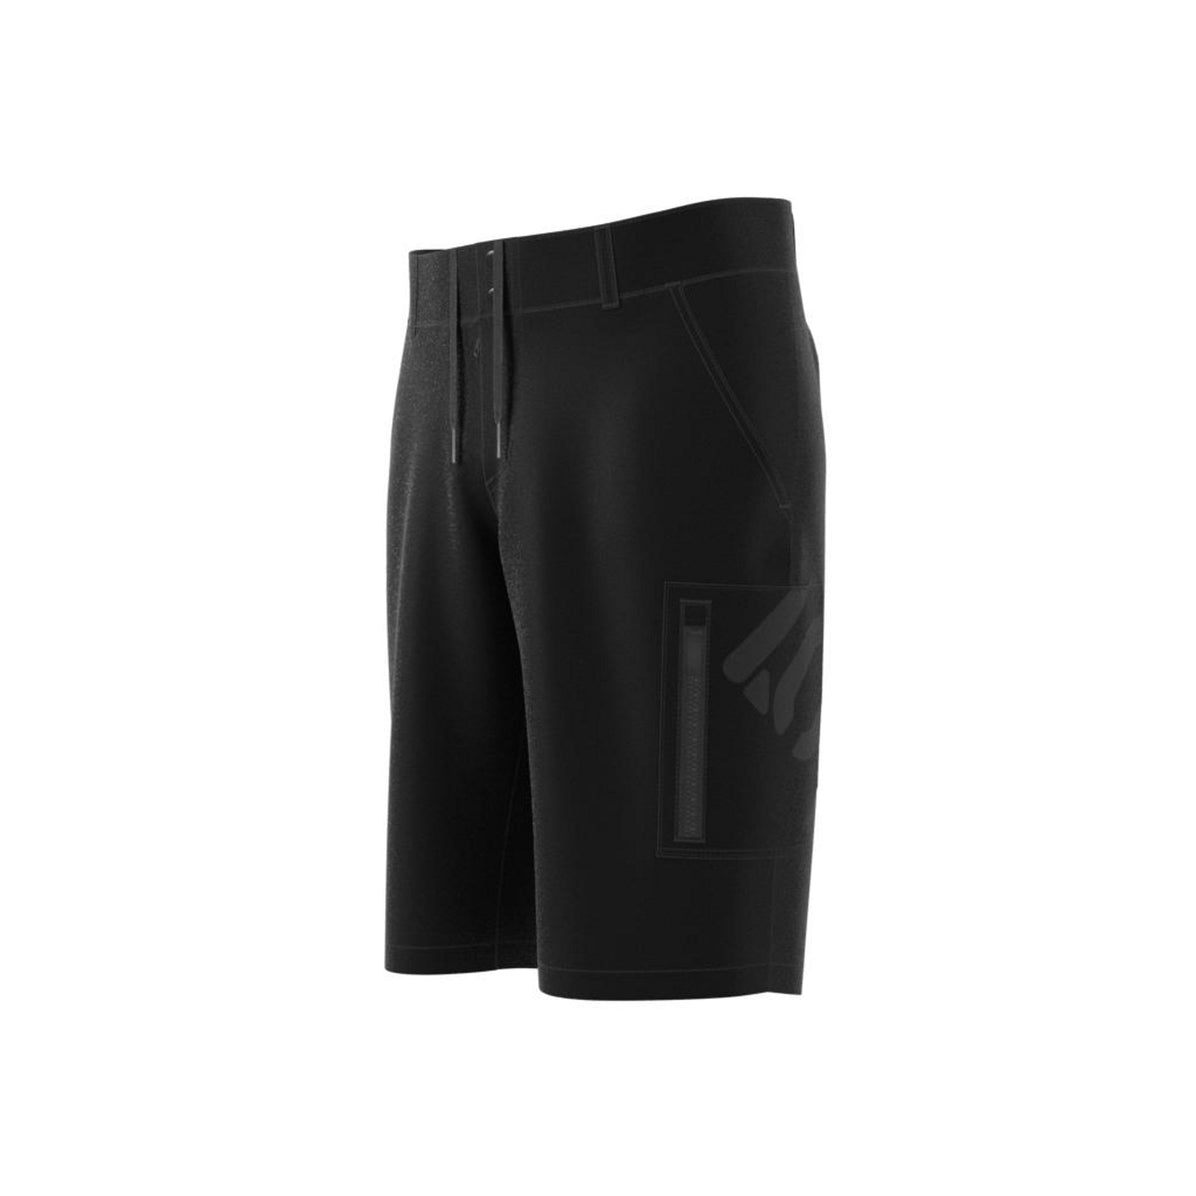 Five Ten Brand of the Brave Shorts - Black